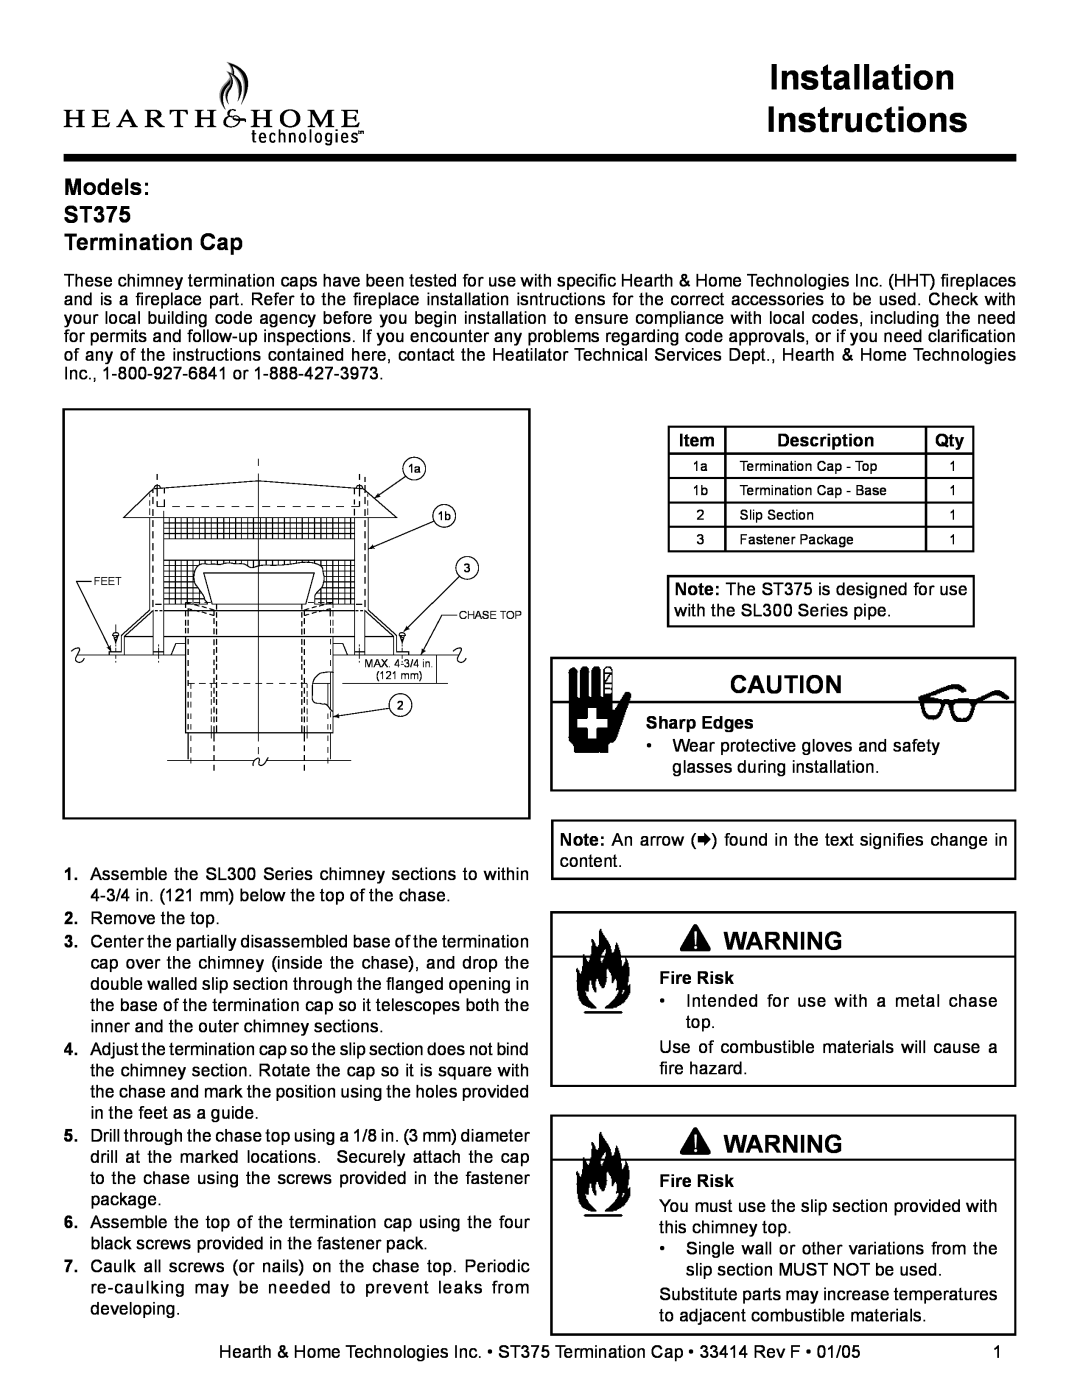 Hearth and Home Technologies installation instructions Installation Instructions, Models ST375 Termination Cap 